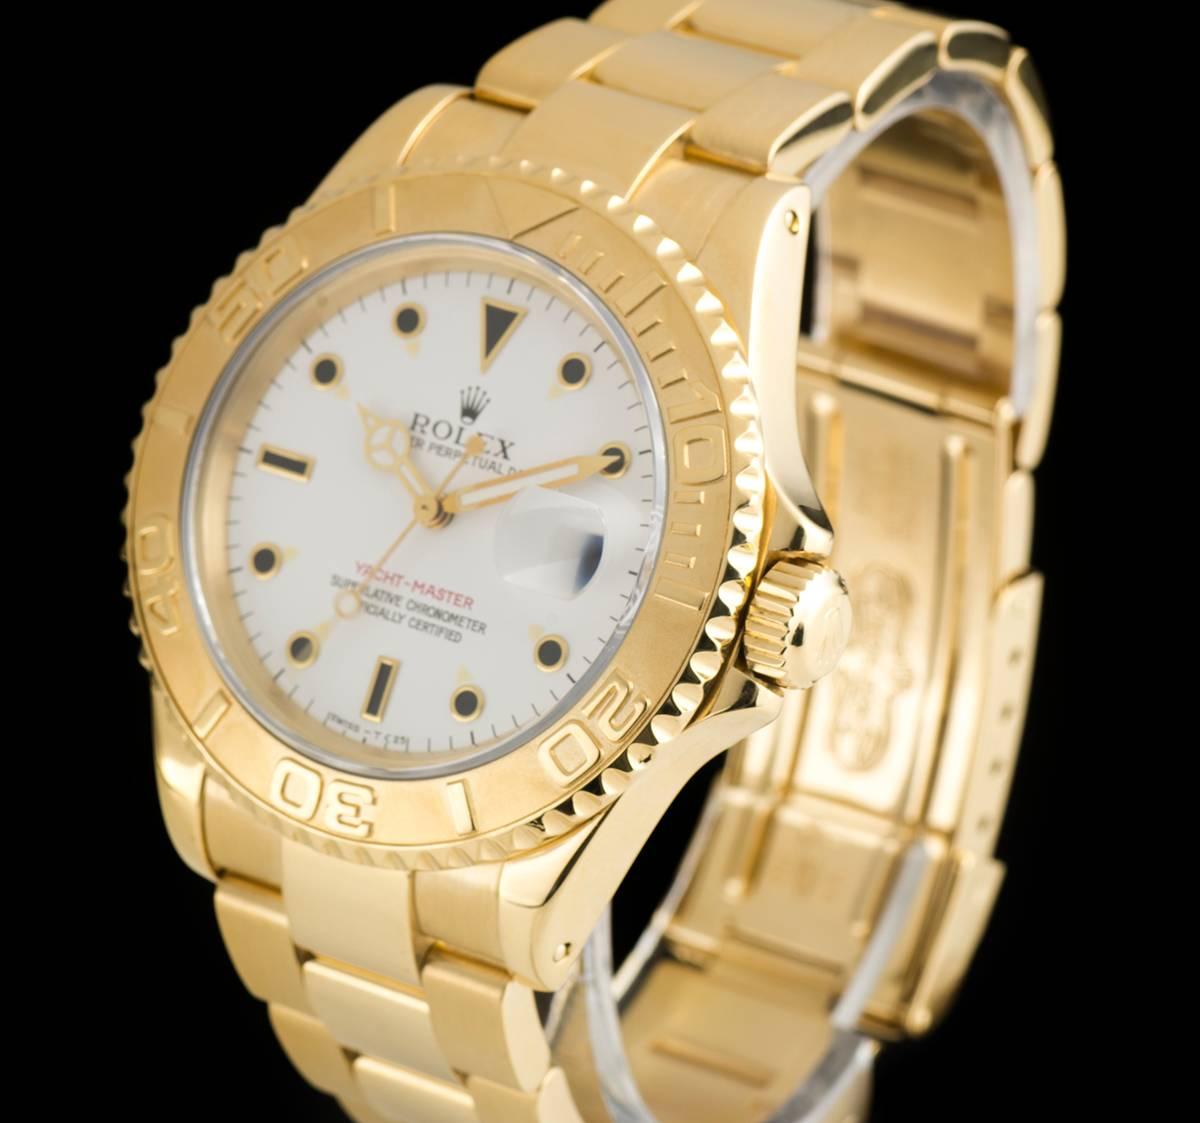 An 18k Yellow Gold Oyster Perpetual Yacht-Master Gents Wristwatch, white dial with applied hour markers, date at 3 0'clock, an 18k yellow gold uni-directional rotating bezel, an 18k yellow gold oyster bracelet with an 18k yellow gold oysterlock